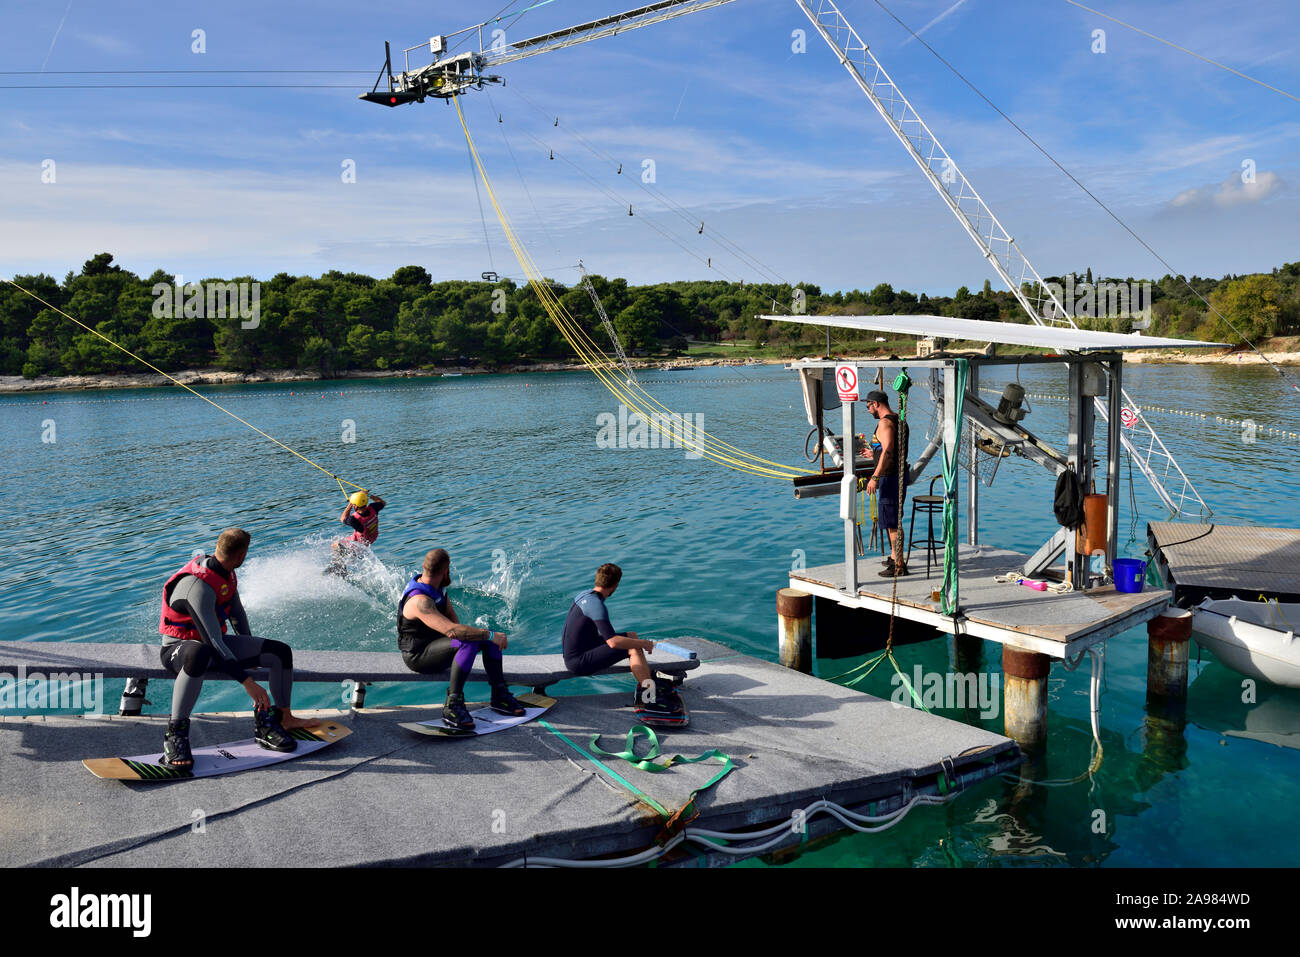 Launch station for cable wakeboarding on Uvala valovine bay outskirts of Pula, Croatia. Wakeboarding being pulled by overhead cable instead of boat Stock Photo